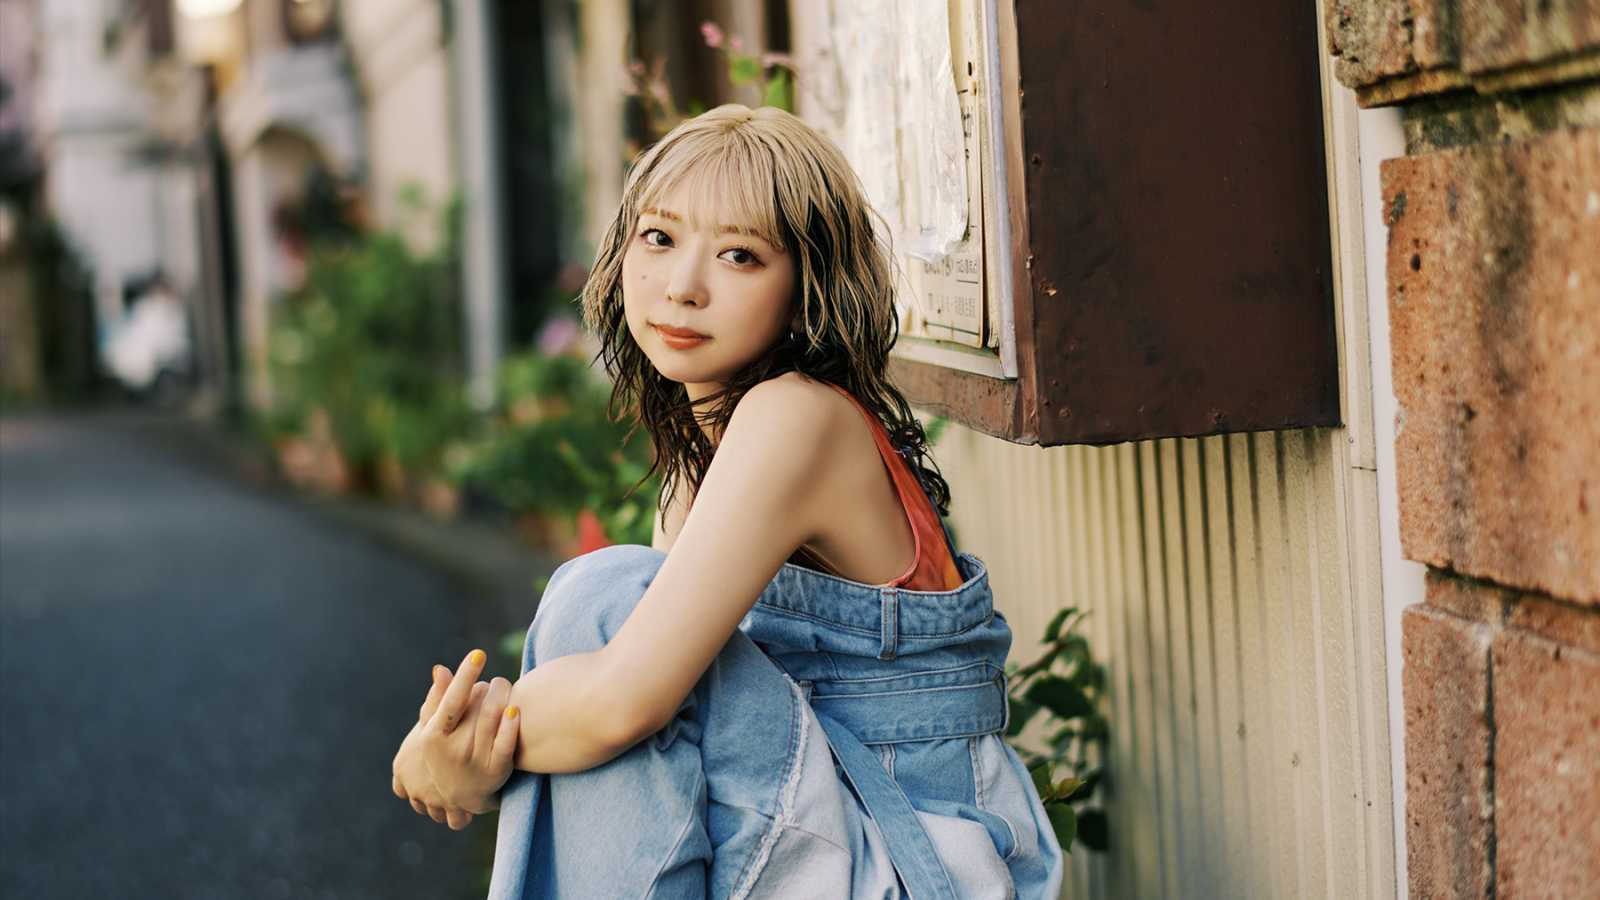 Anna Takeuchi annonce son nouveau single © All rights reserved.